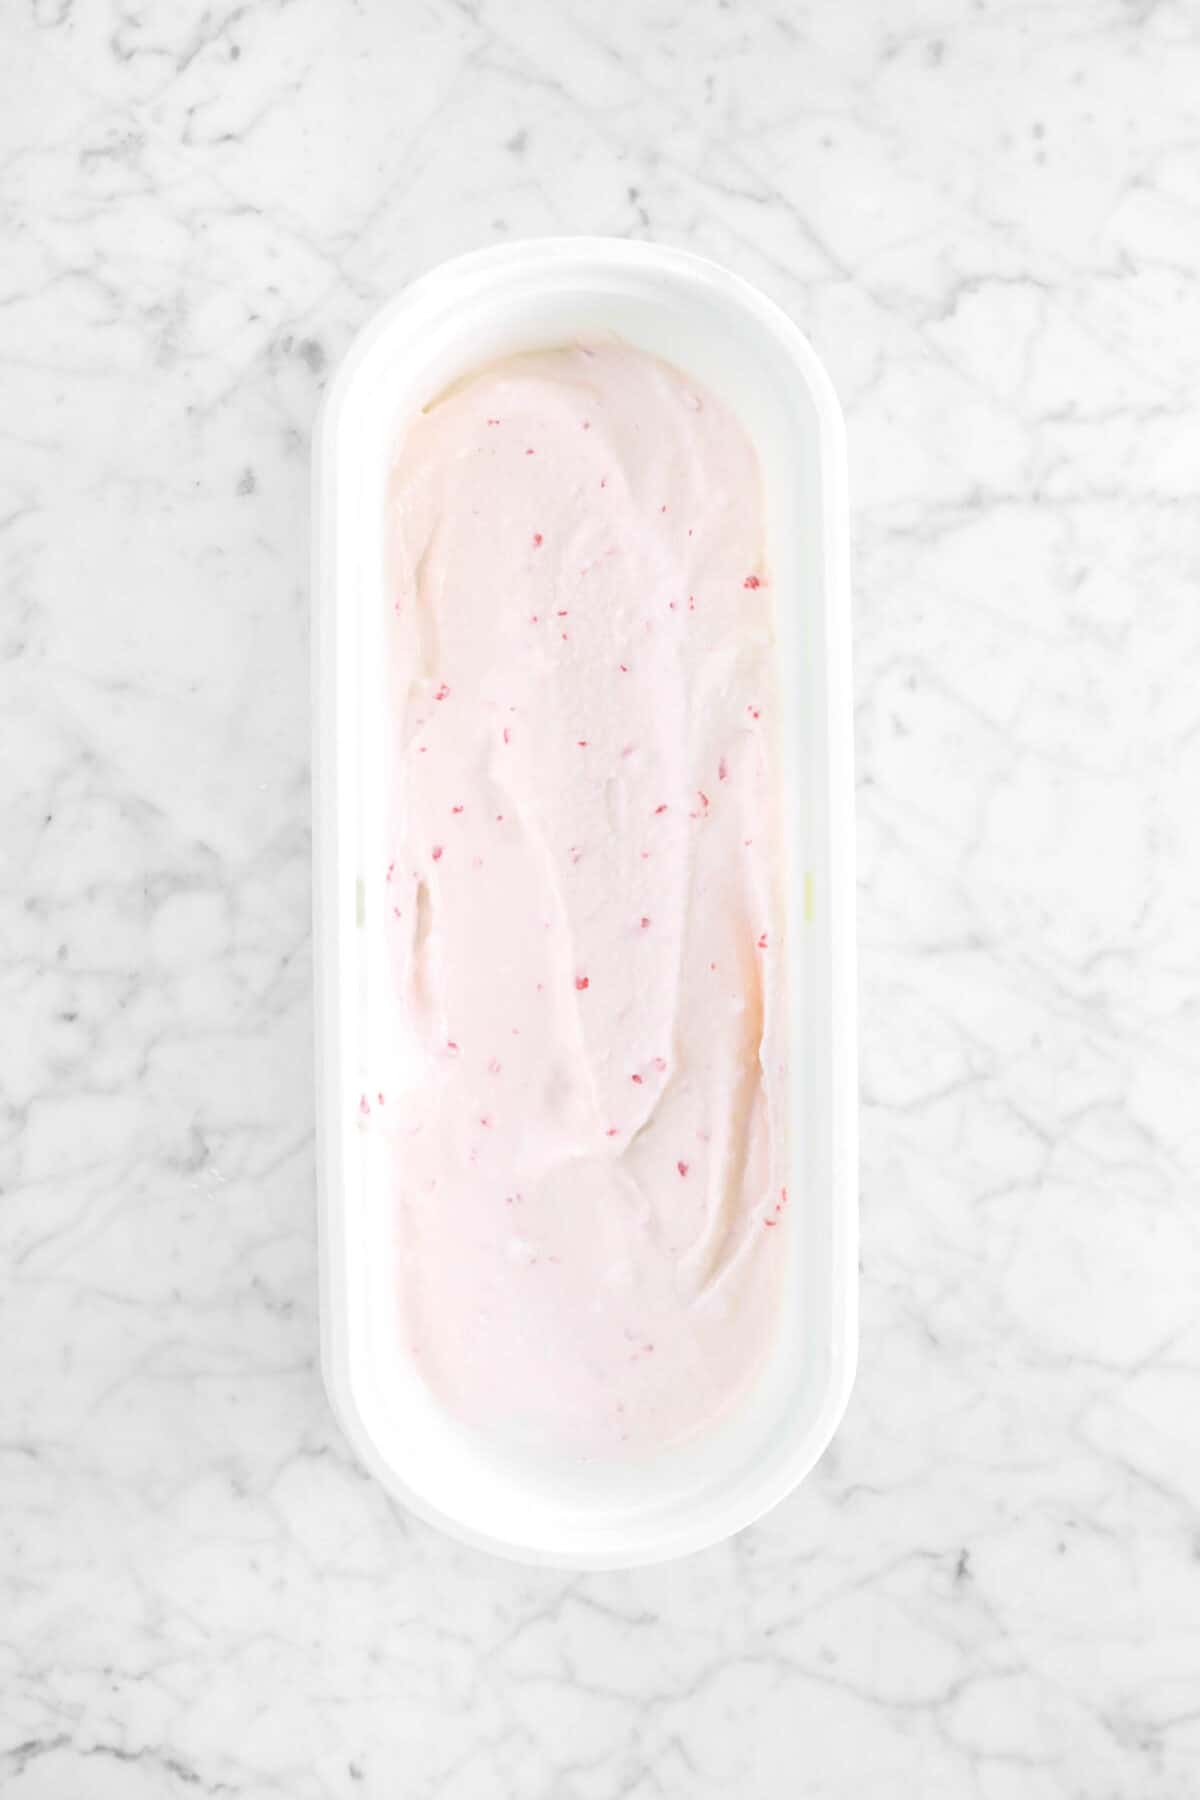 peppermint ice cream in container